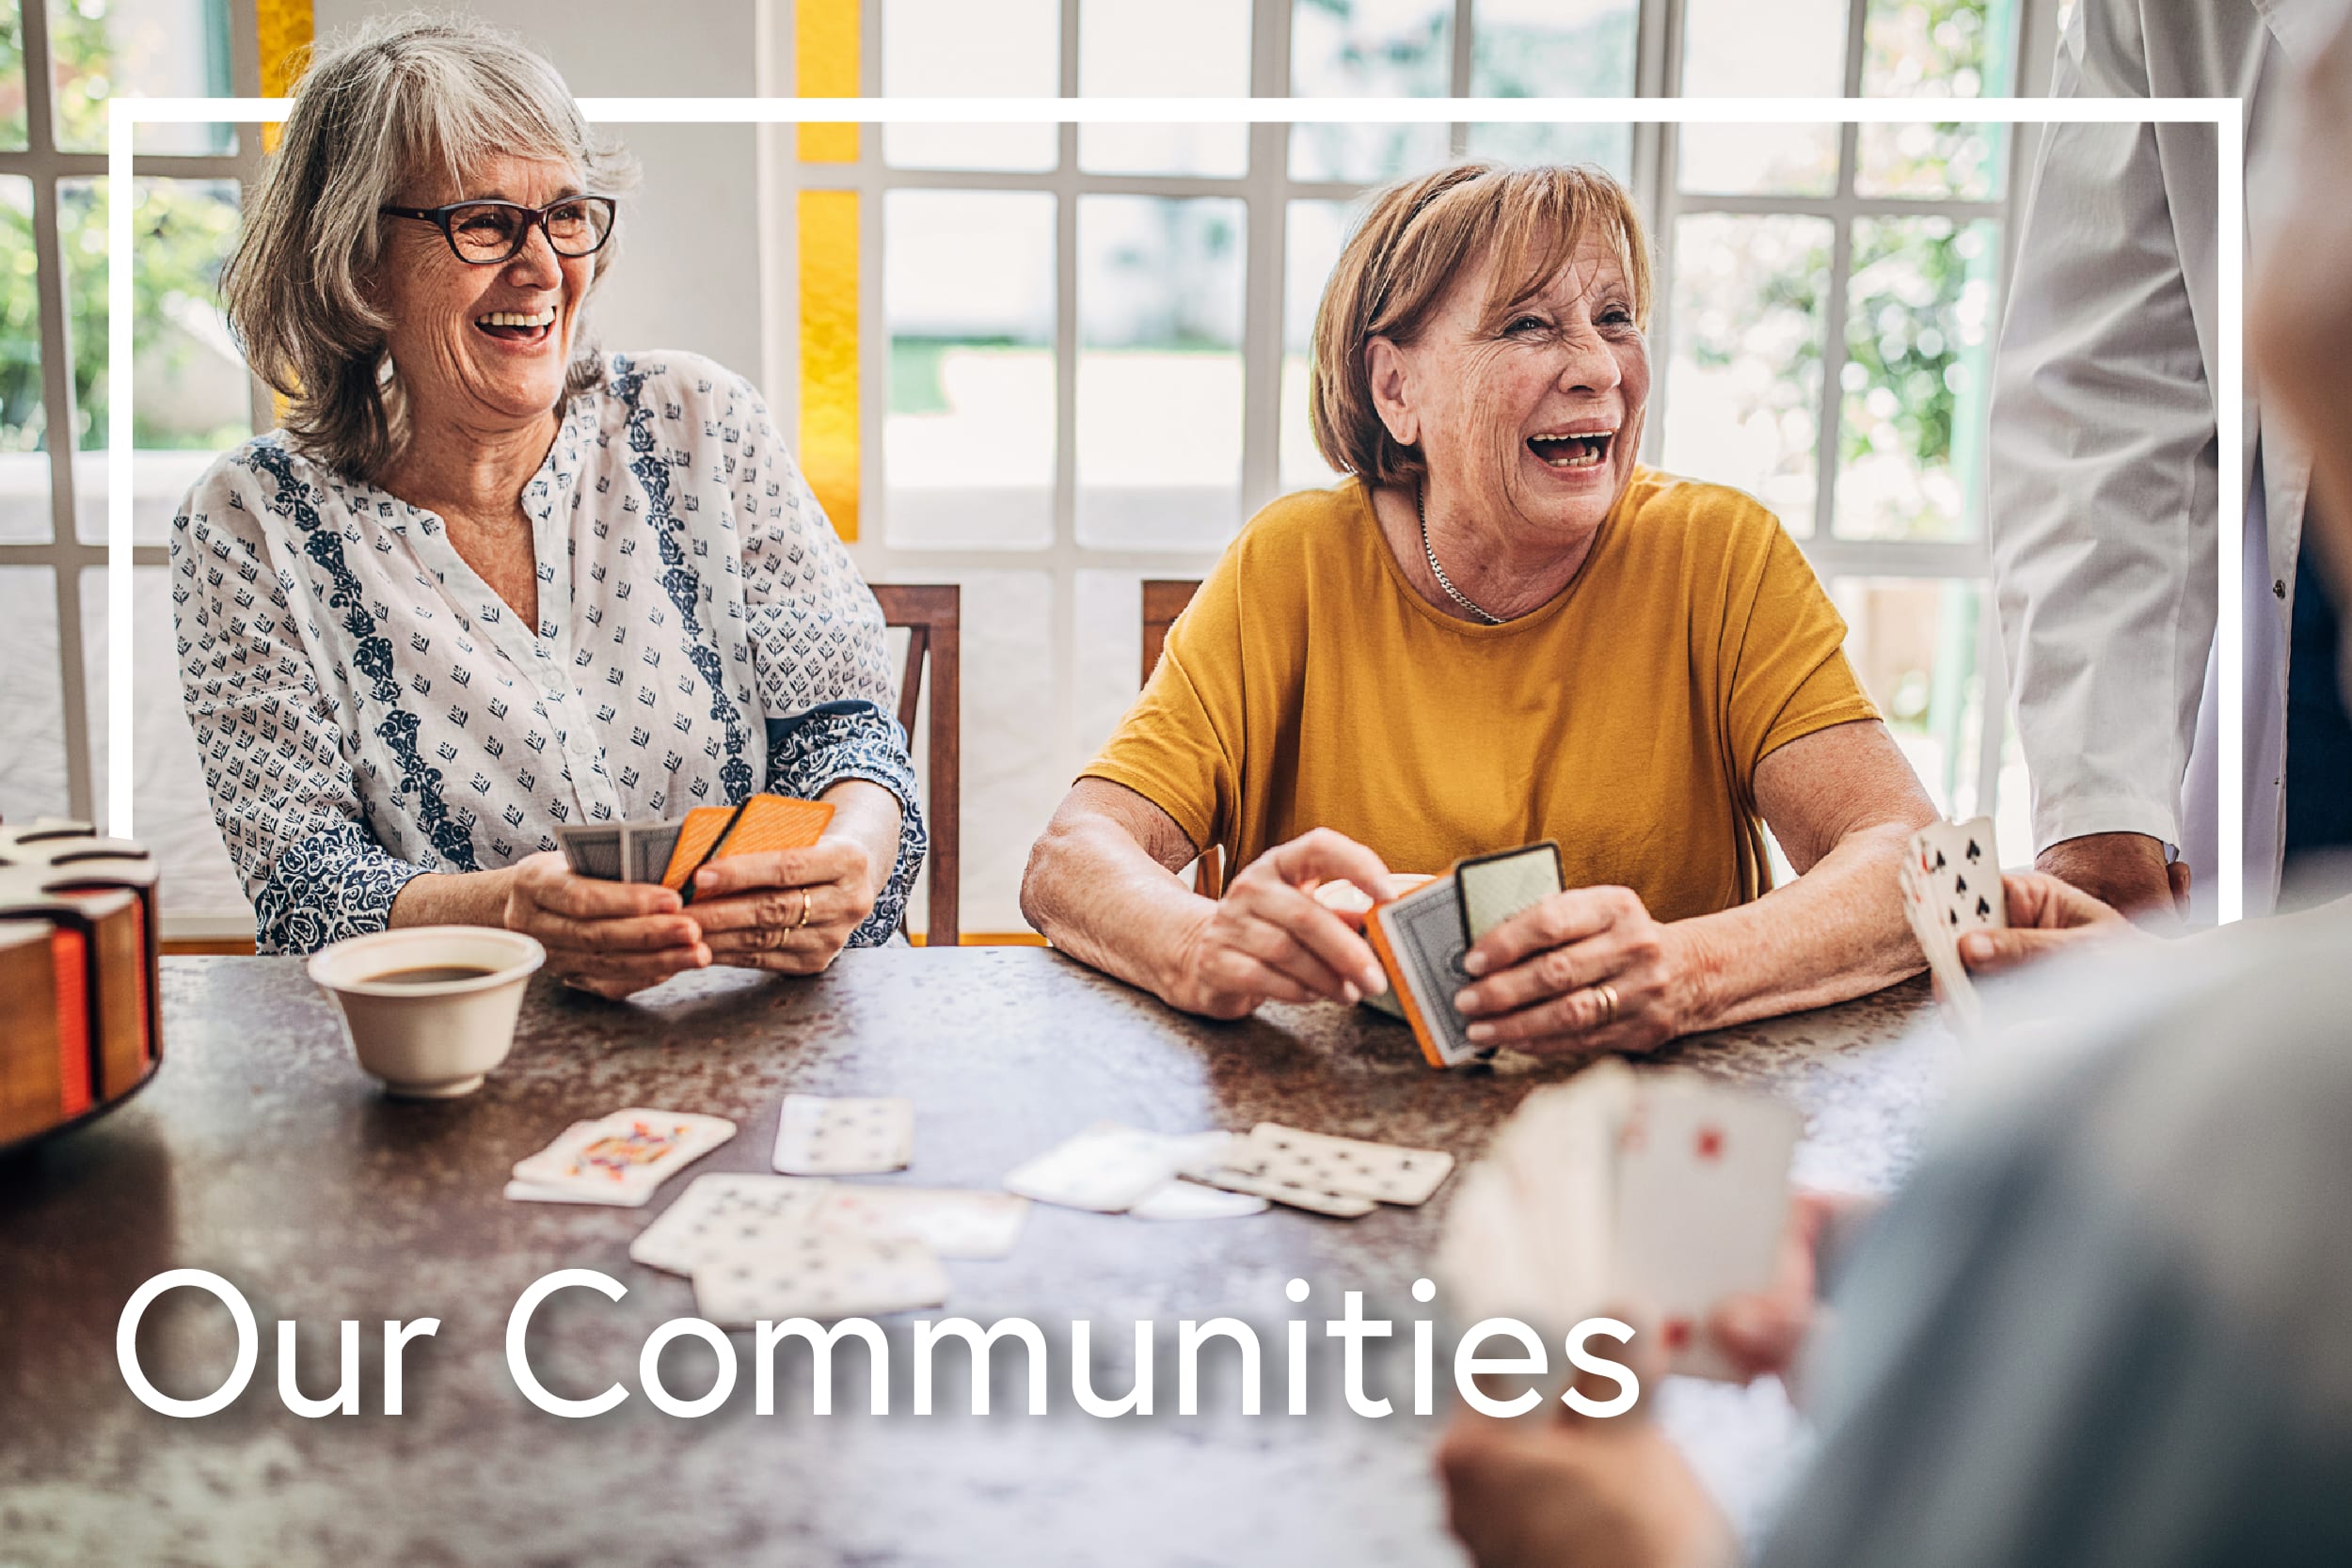 Learn more about our communities at Heritage Senior Living